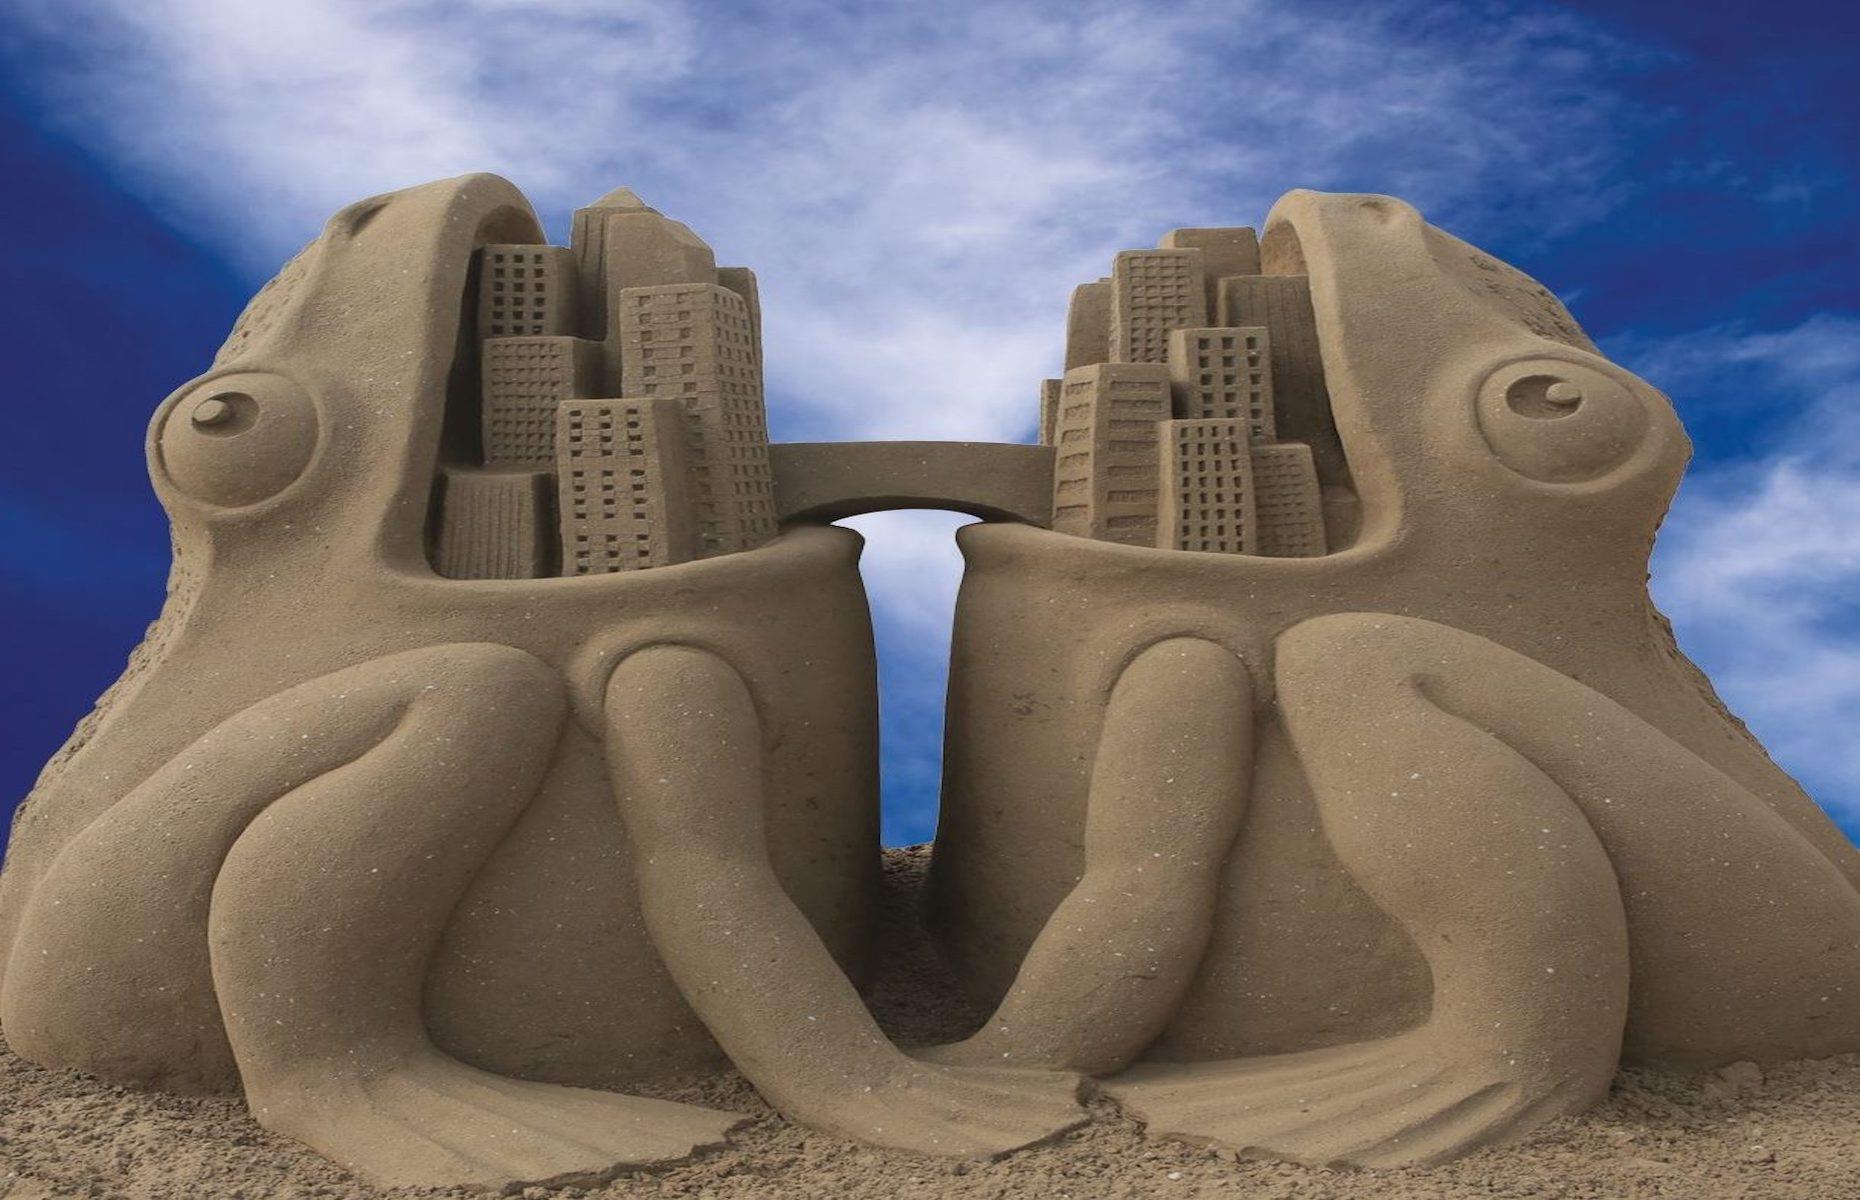 <p>The capital of the UK’s sand art scene has to be the North Somerset seaside town of Weston-super-Mare, which started hosting an annual sand sculpture festival in 2006. Each year's event has a different theme with a public vote to decide the winning artwork. This was the 2017 winner, created by Edith van de Wetering under the theme Topsy Turvy. Titled Your Place Or Mine, the sand artwork shows two frogs with cities in their mouths and a tongue bridge connecting them. The festival has been postponed for the last two summers.</p>